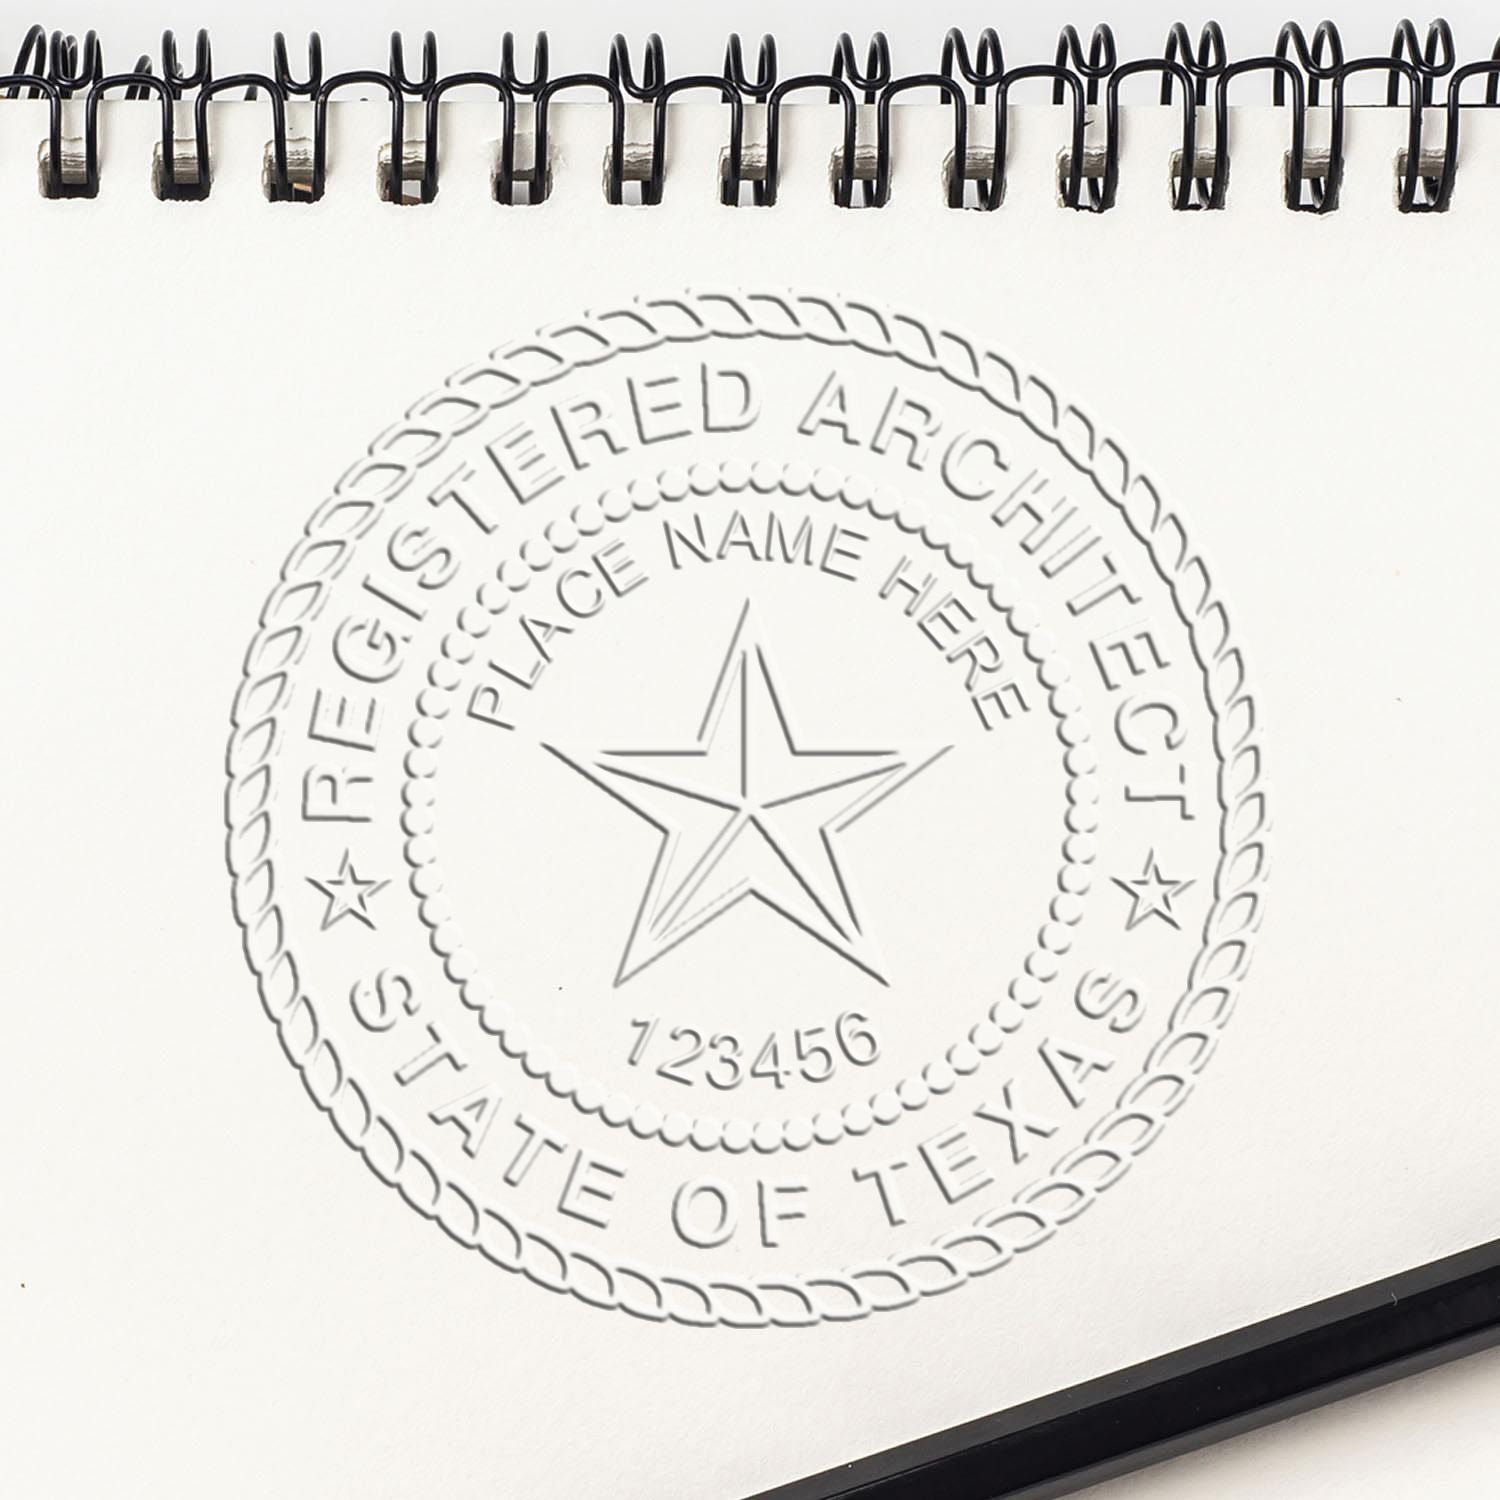 The main image for the Texas Desk Architect Embossing Seal depicting a sample of the imprint and electronic files